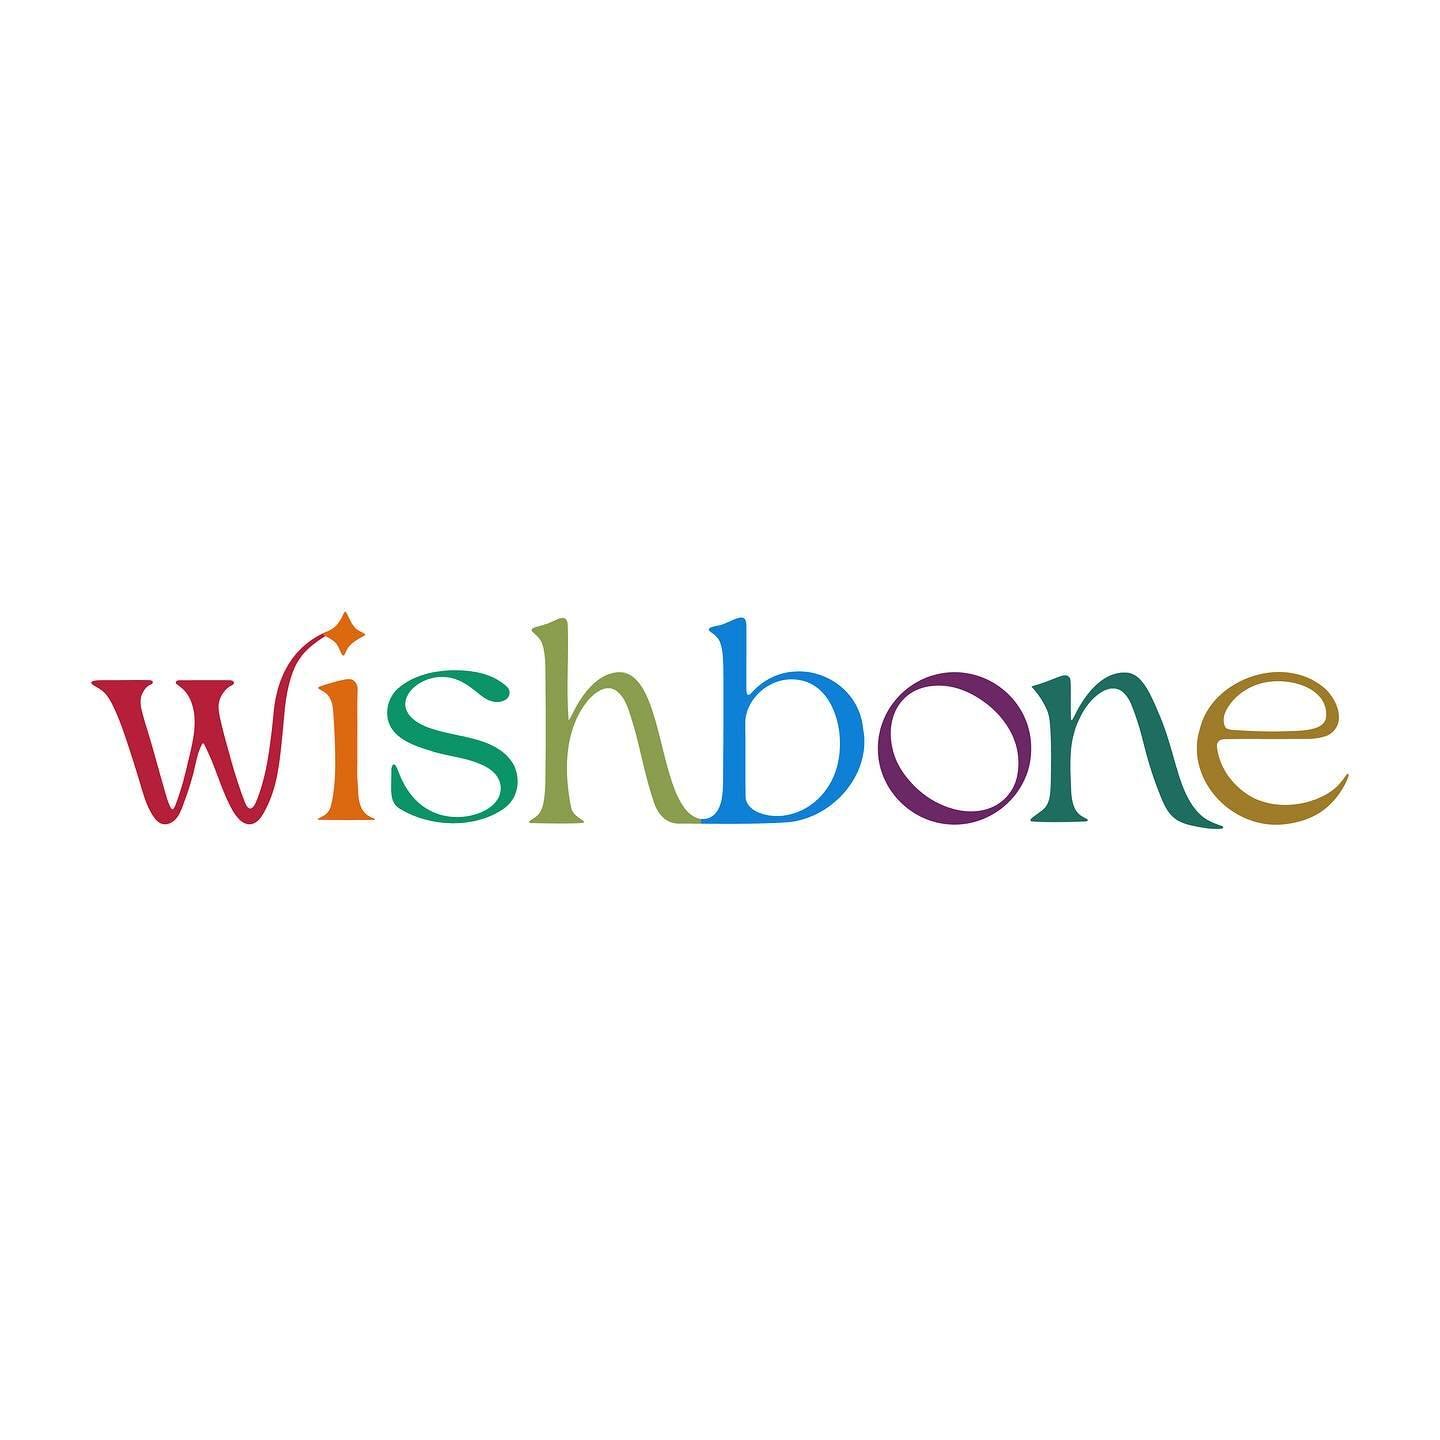 Thrilled to announce my latest branding project for a wonderful vintage apparel brand @wishbone.vintage 🌈

Marie sources the most beautiful clothing across the color spectrum, so we wanted her branding to reflect the playful yet elegant aesthetic of